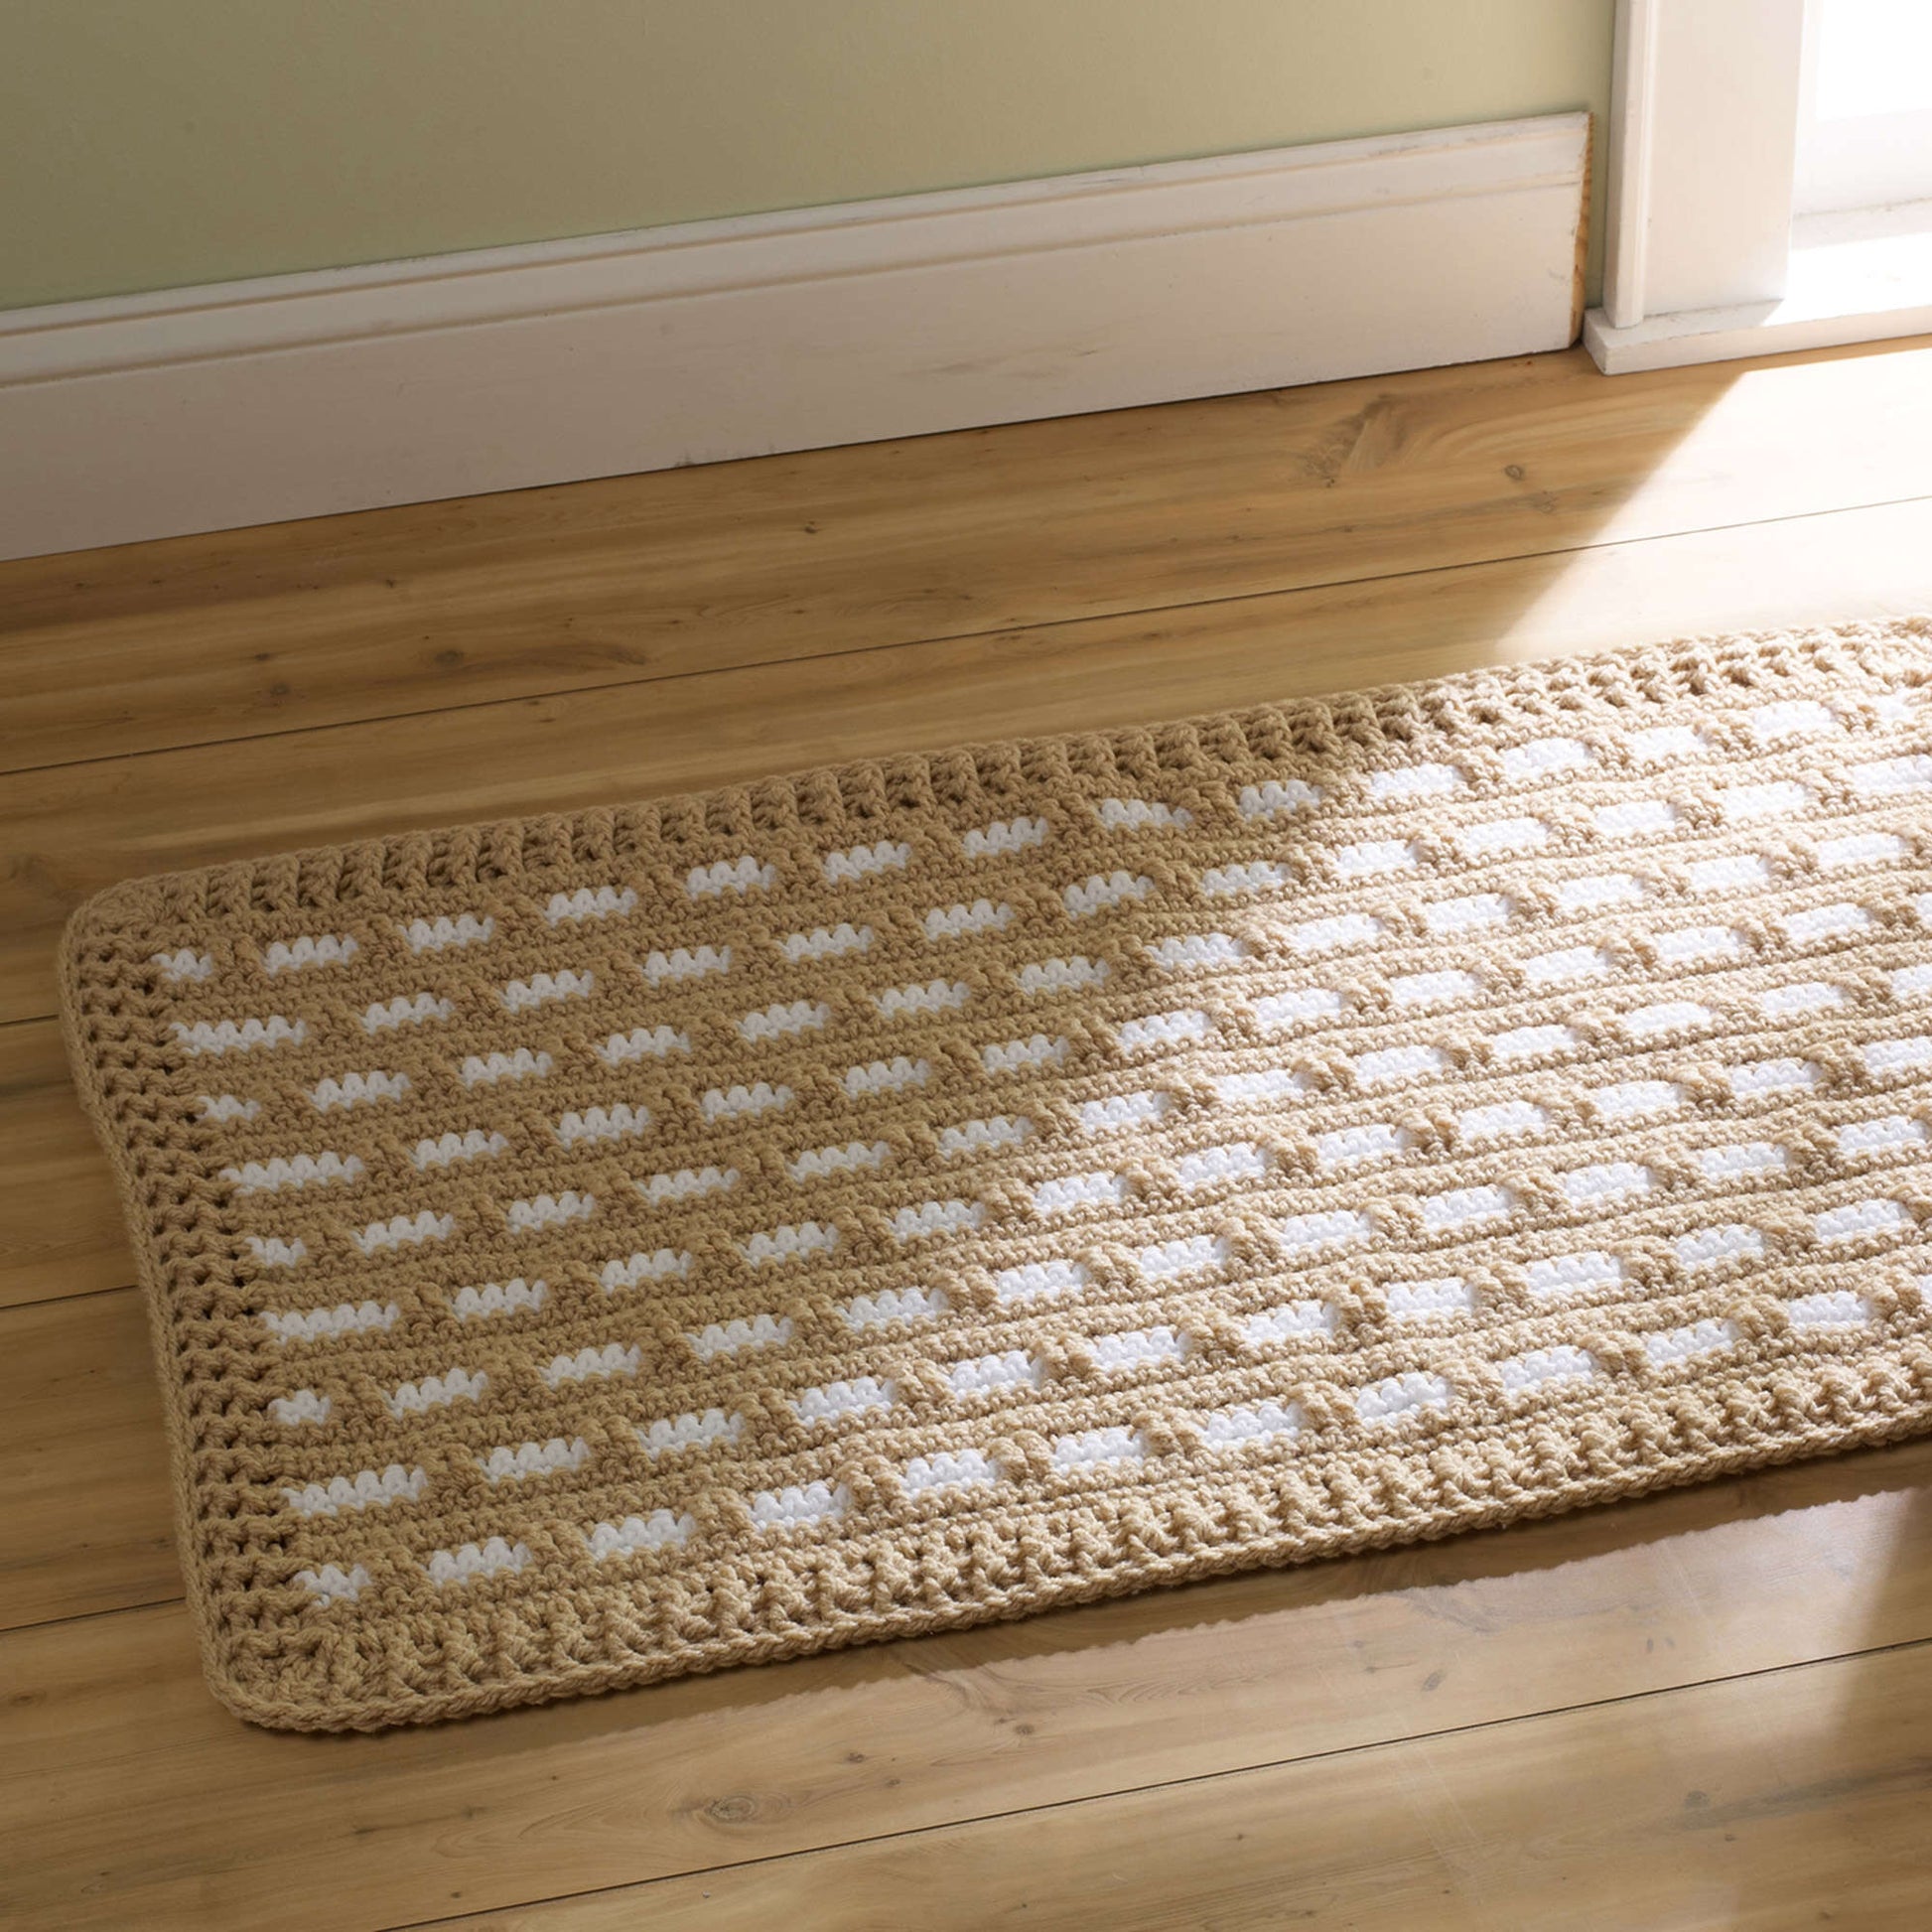 Free Red Heart Hearth & Home Rug Crochet Pattern